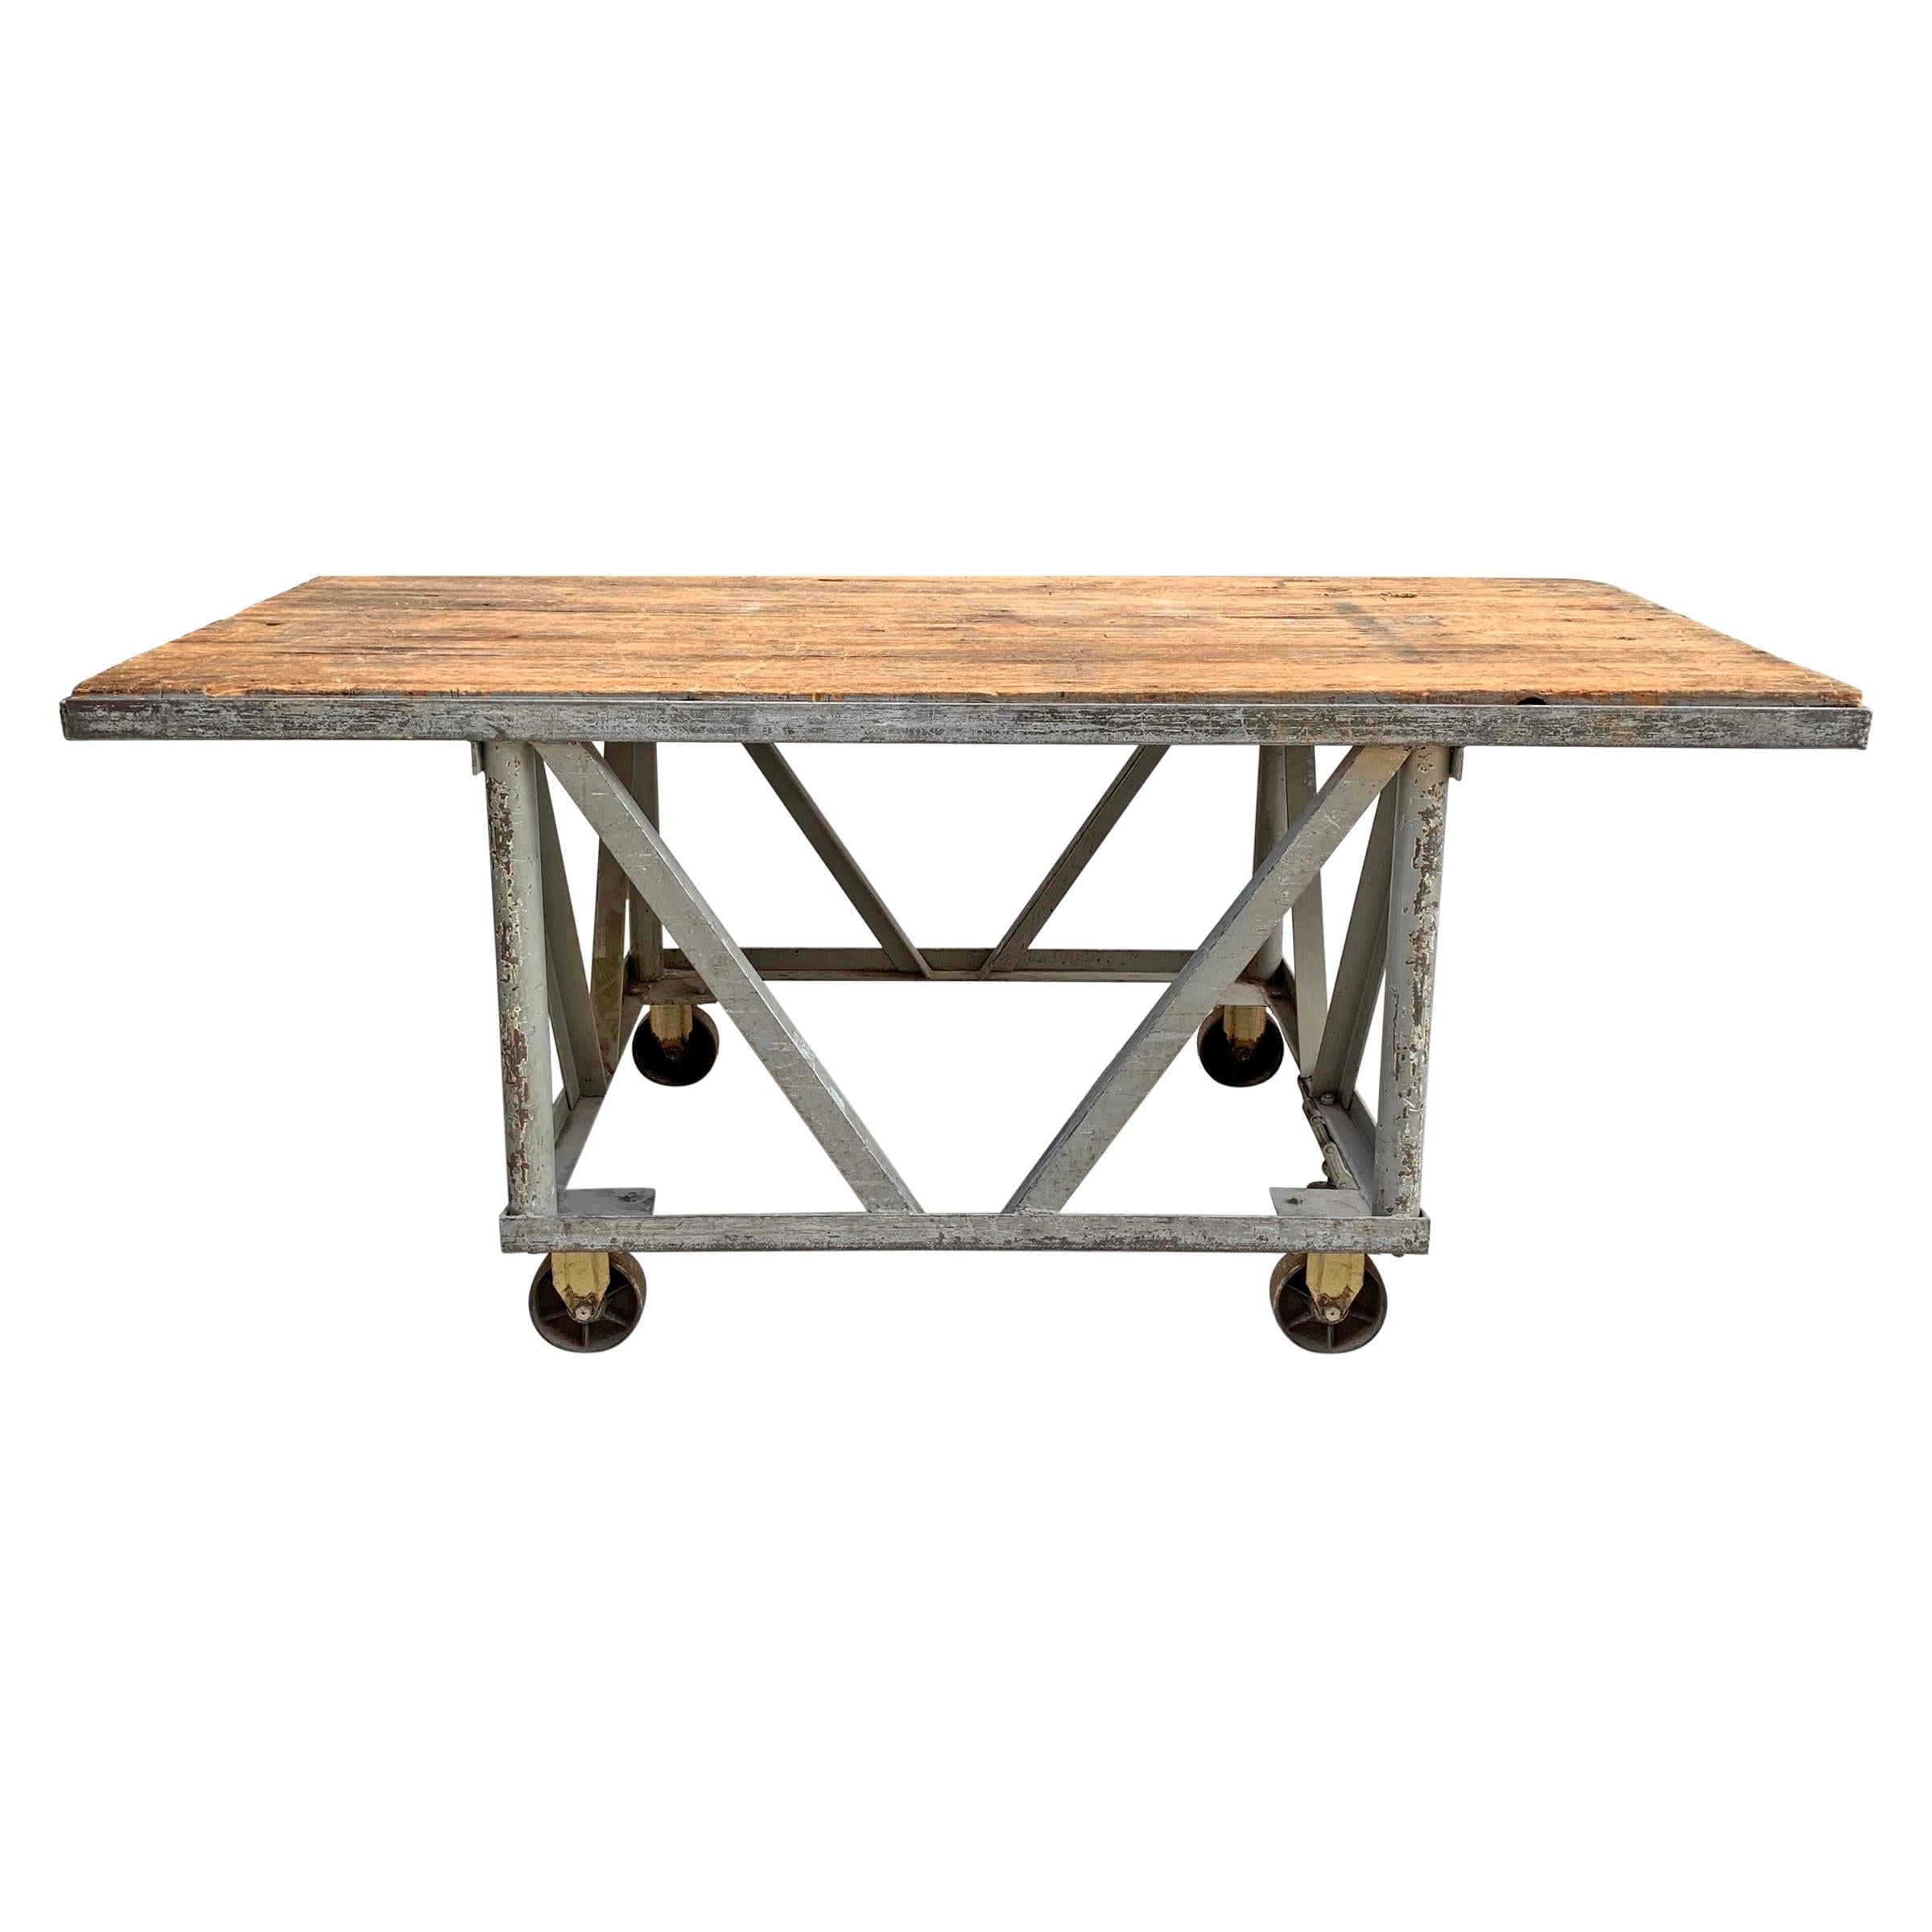 Vintage American Industrial Kitchen Island with Wood Top